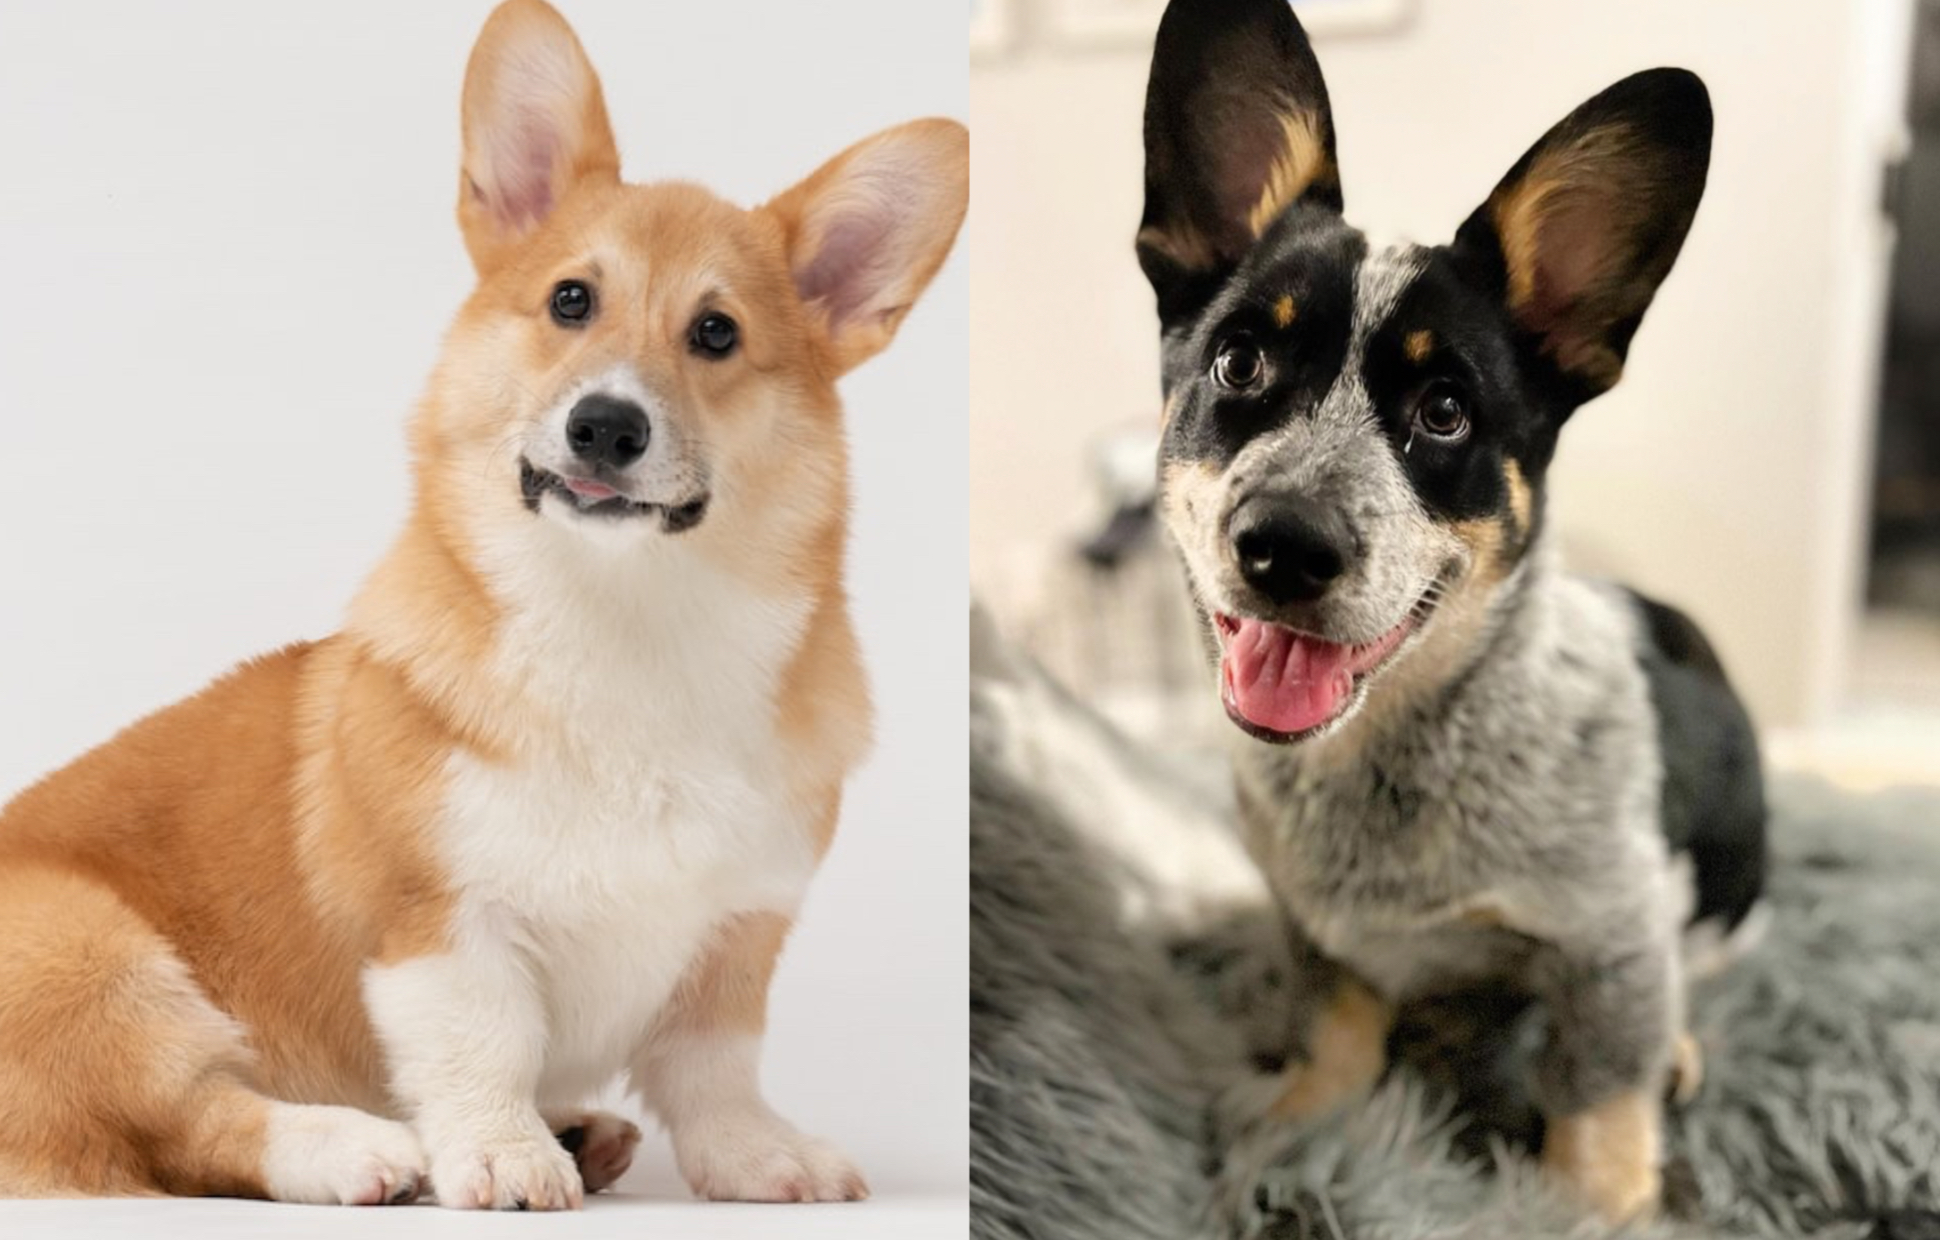 What Is The Difference Between A Corgi And A Cowboy Corgi?